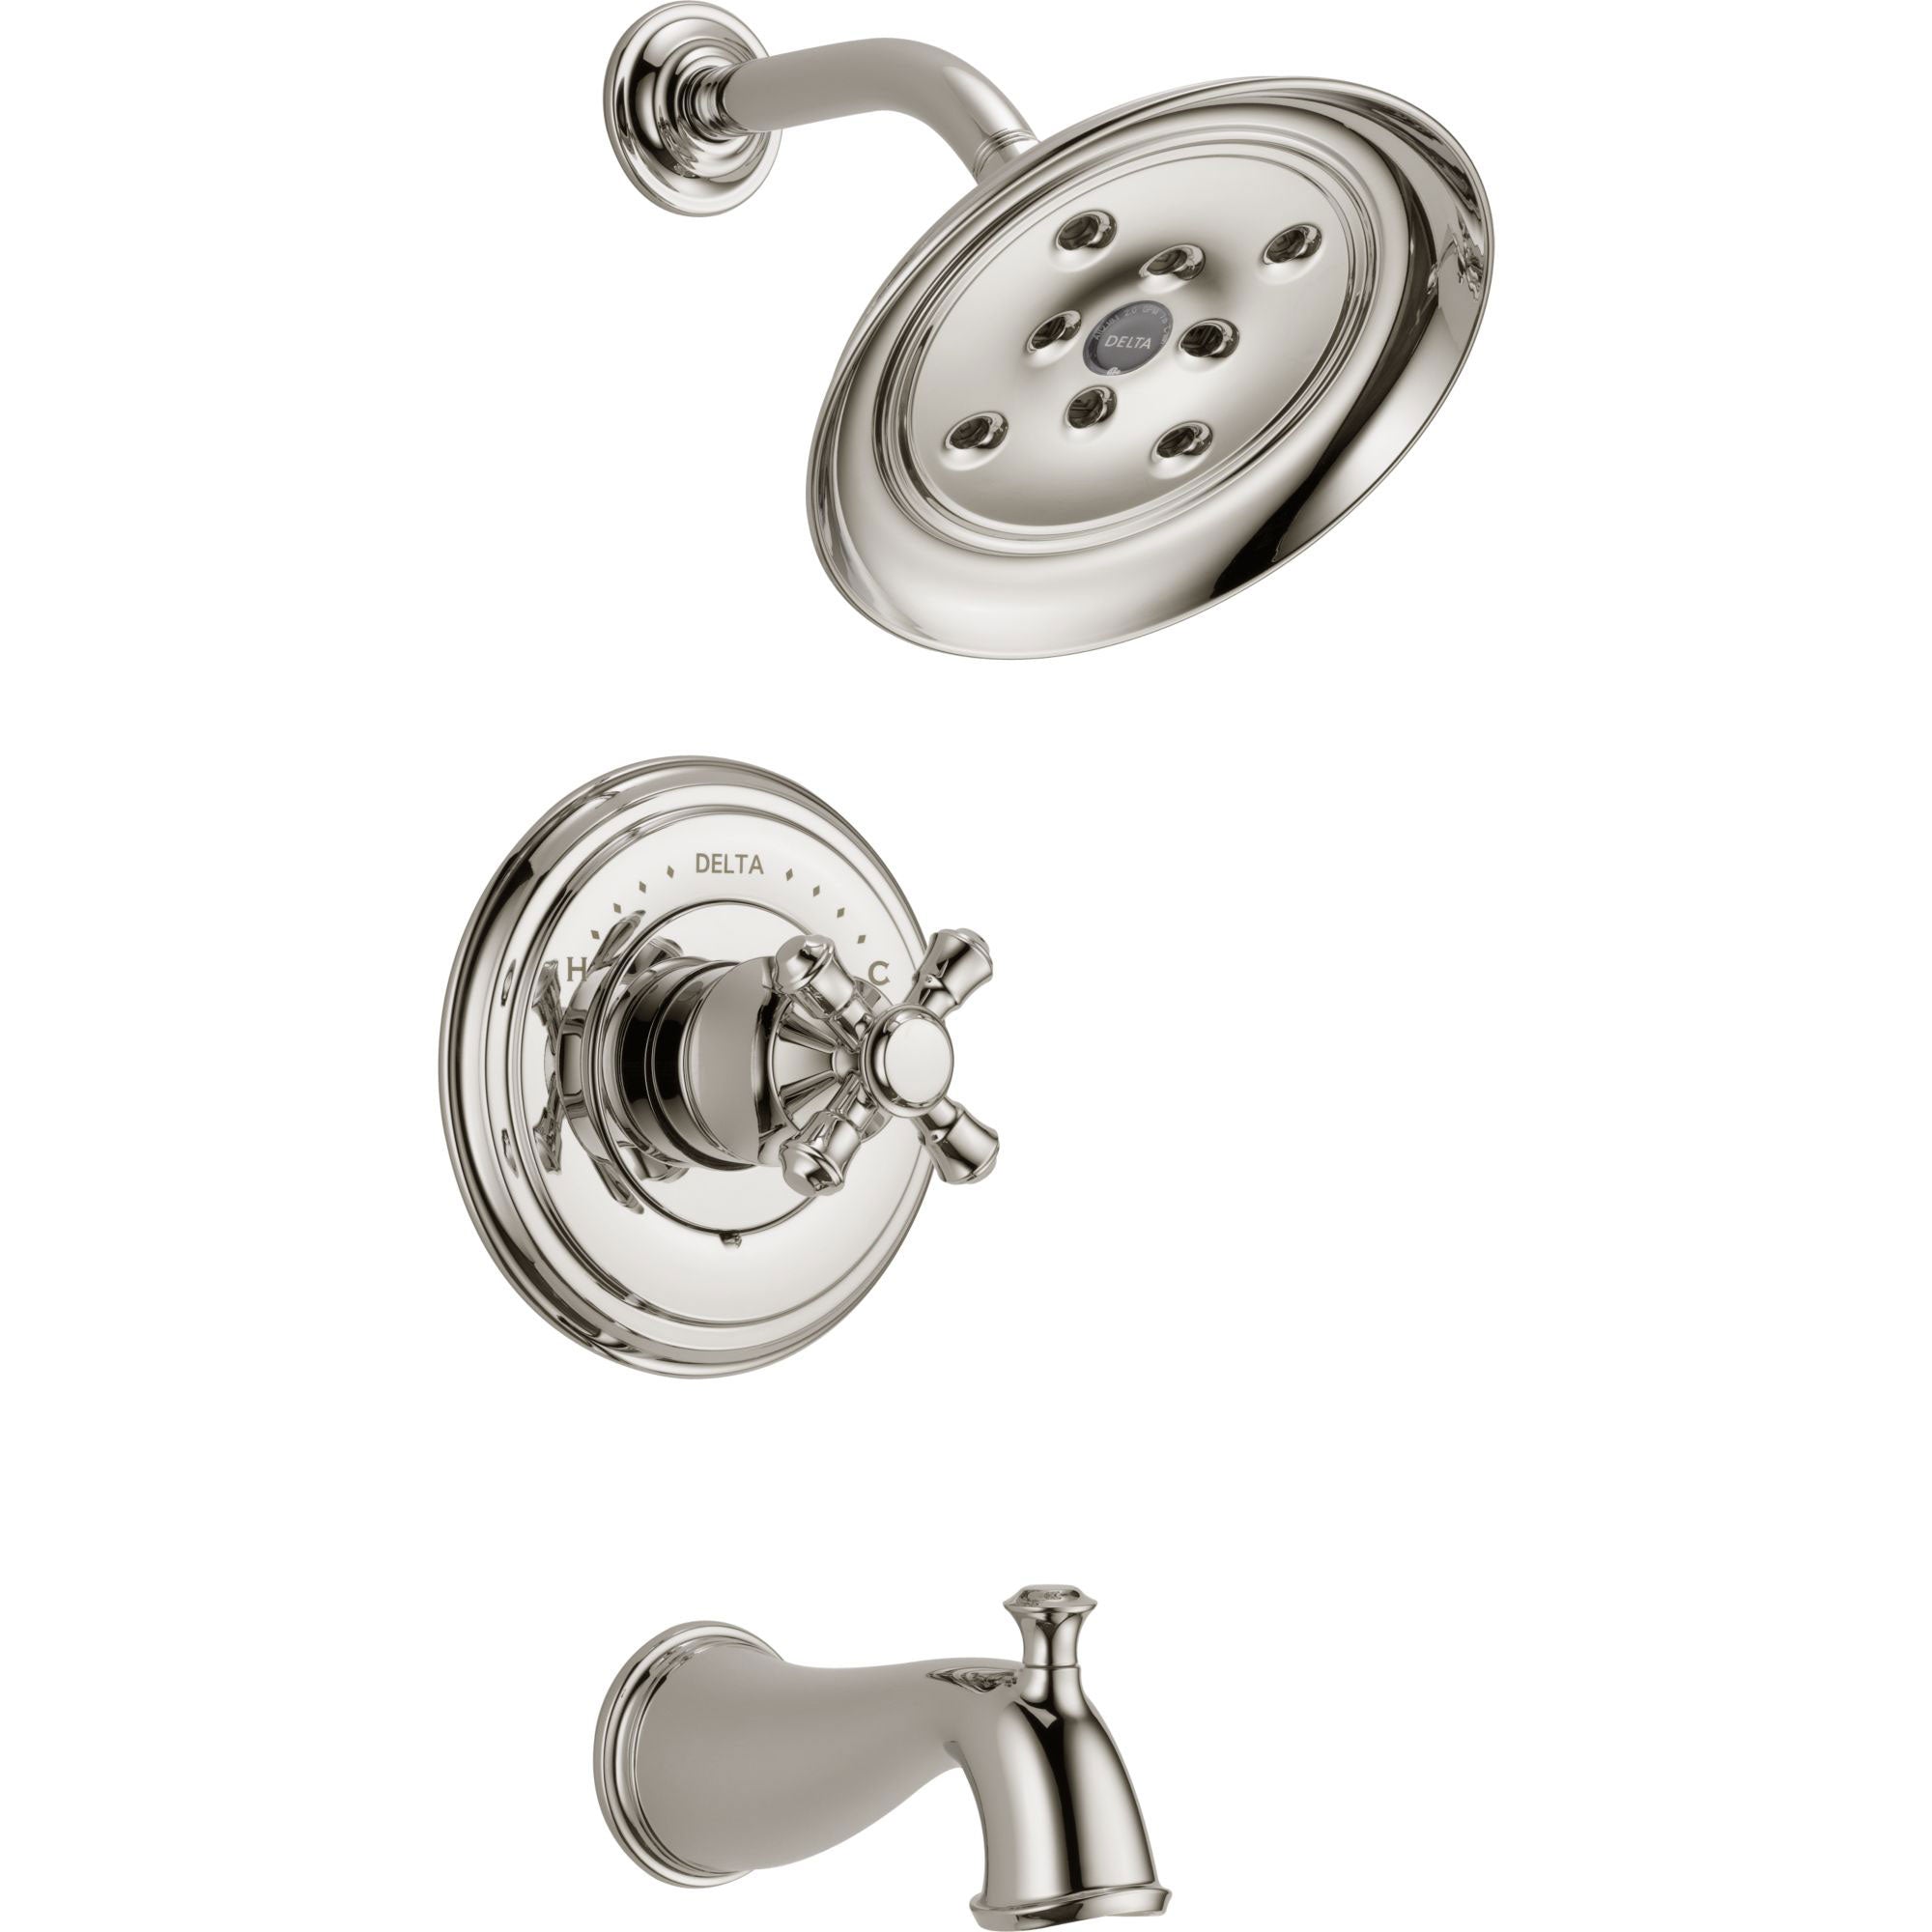 Delta Cassidy Polished Nickel Finish 14 Series Tub and Shower Combination Faucet INCLUDES Rough-in Valve and Single Cross Handle D1164V